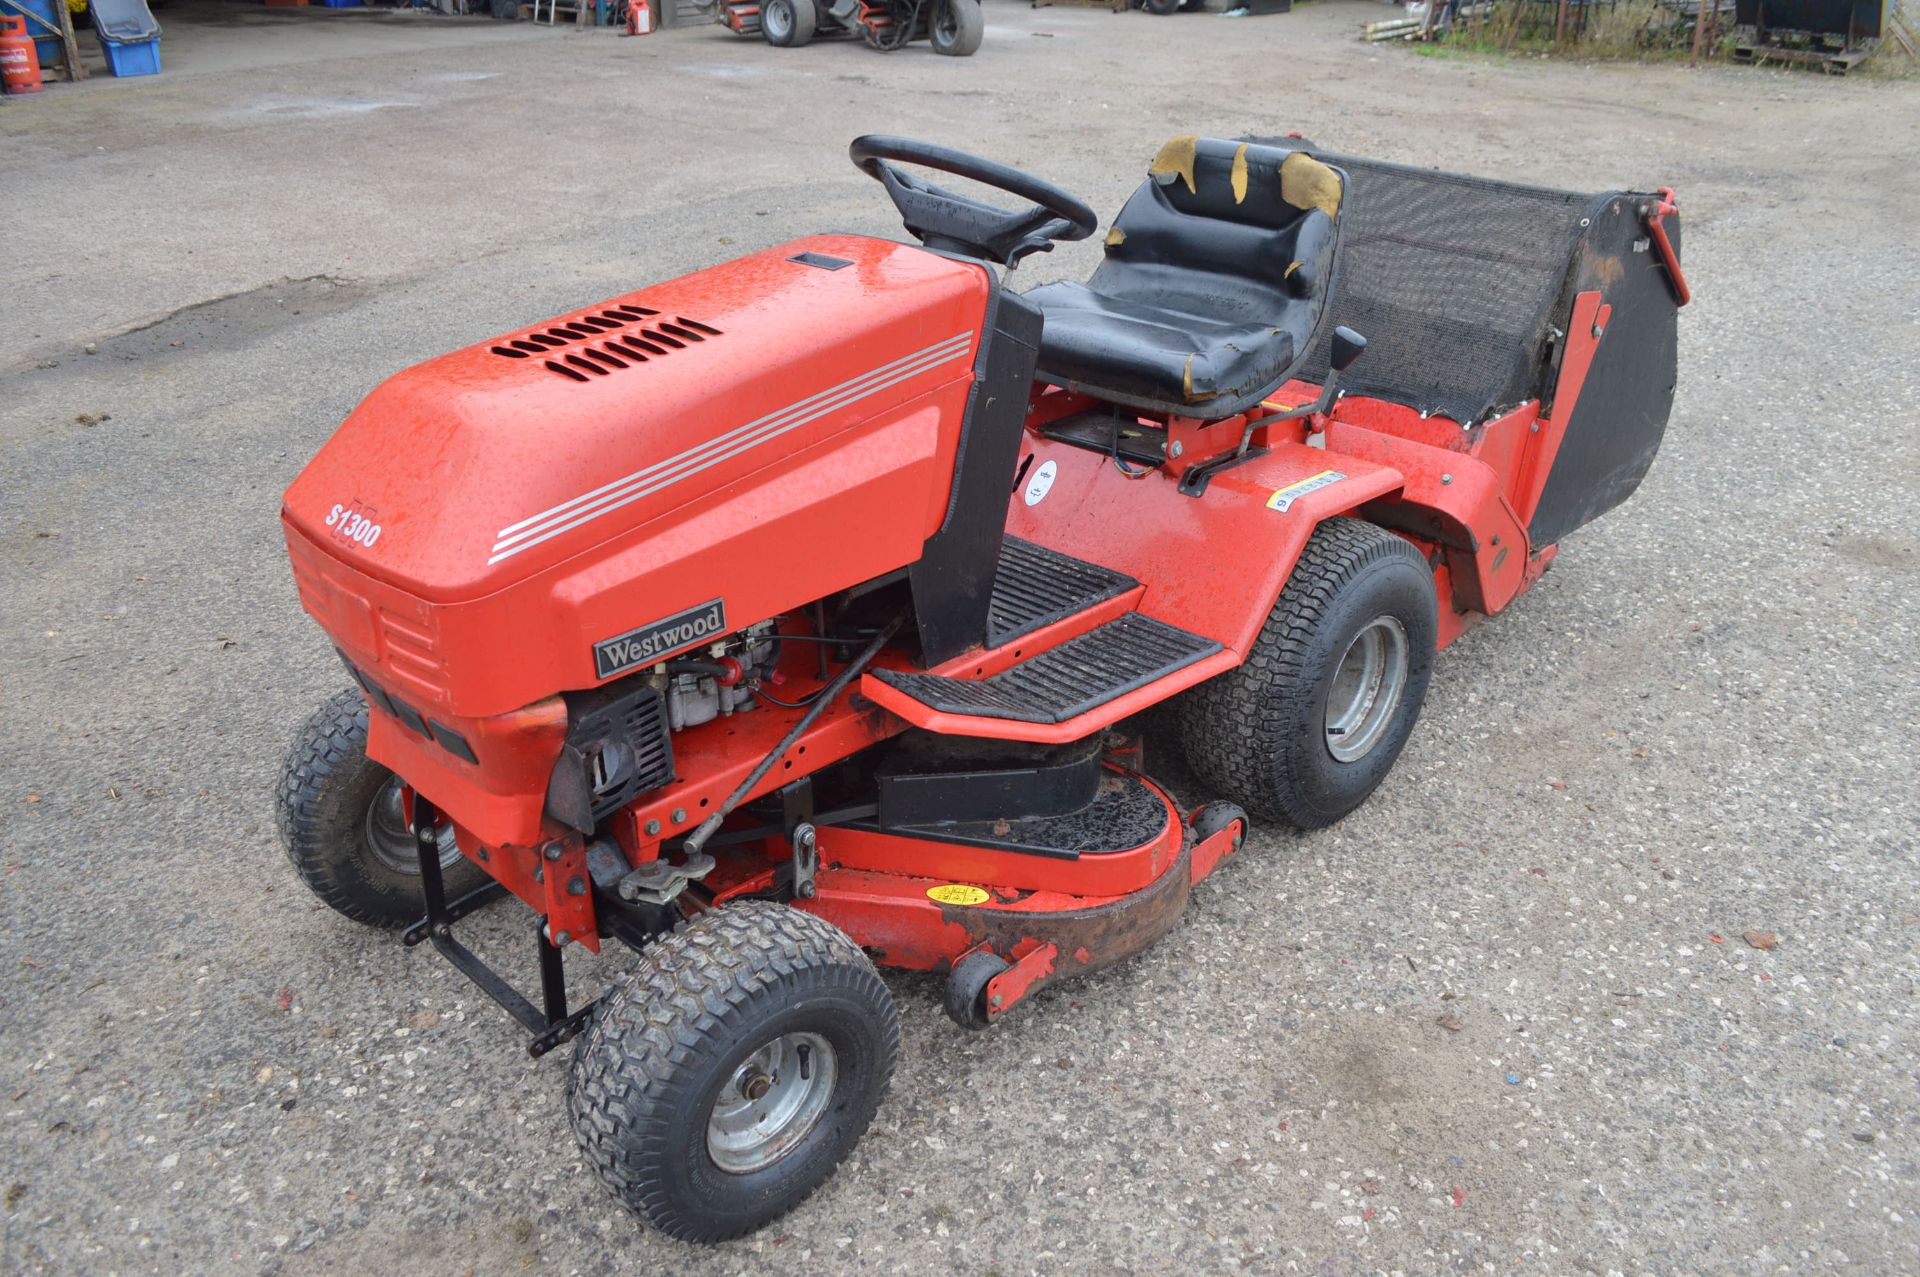 1999 WESTWOOD S1300 RIDE ON LAWN MOWER *NO VAT* - Image 3 of 10